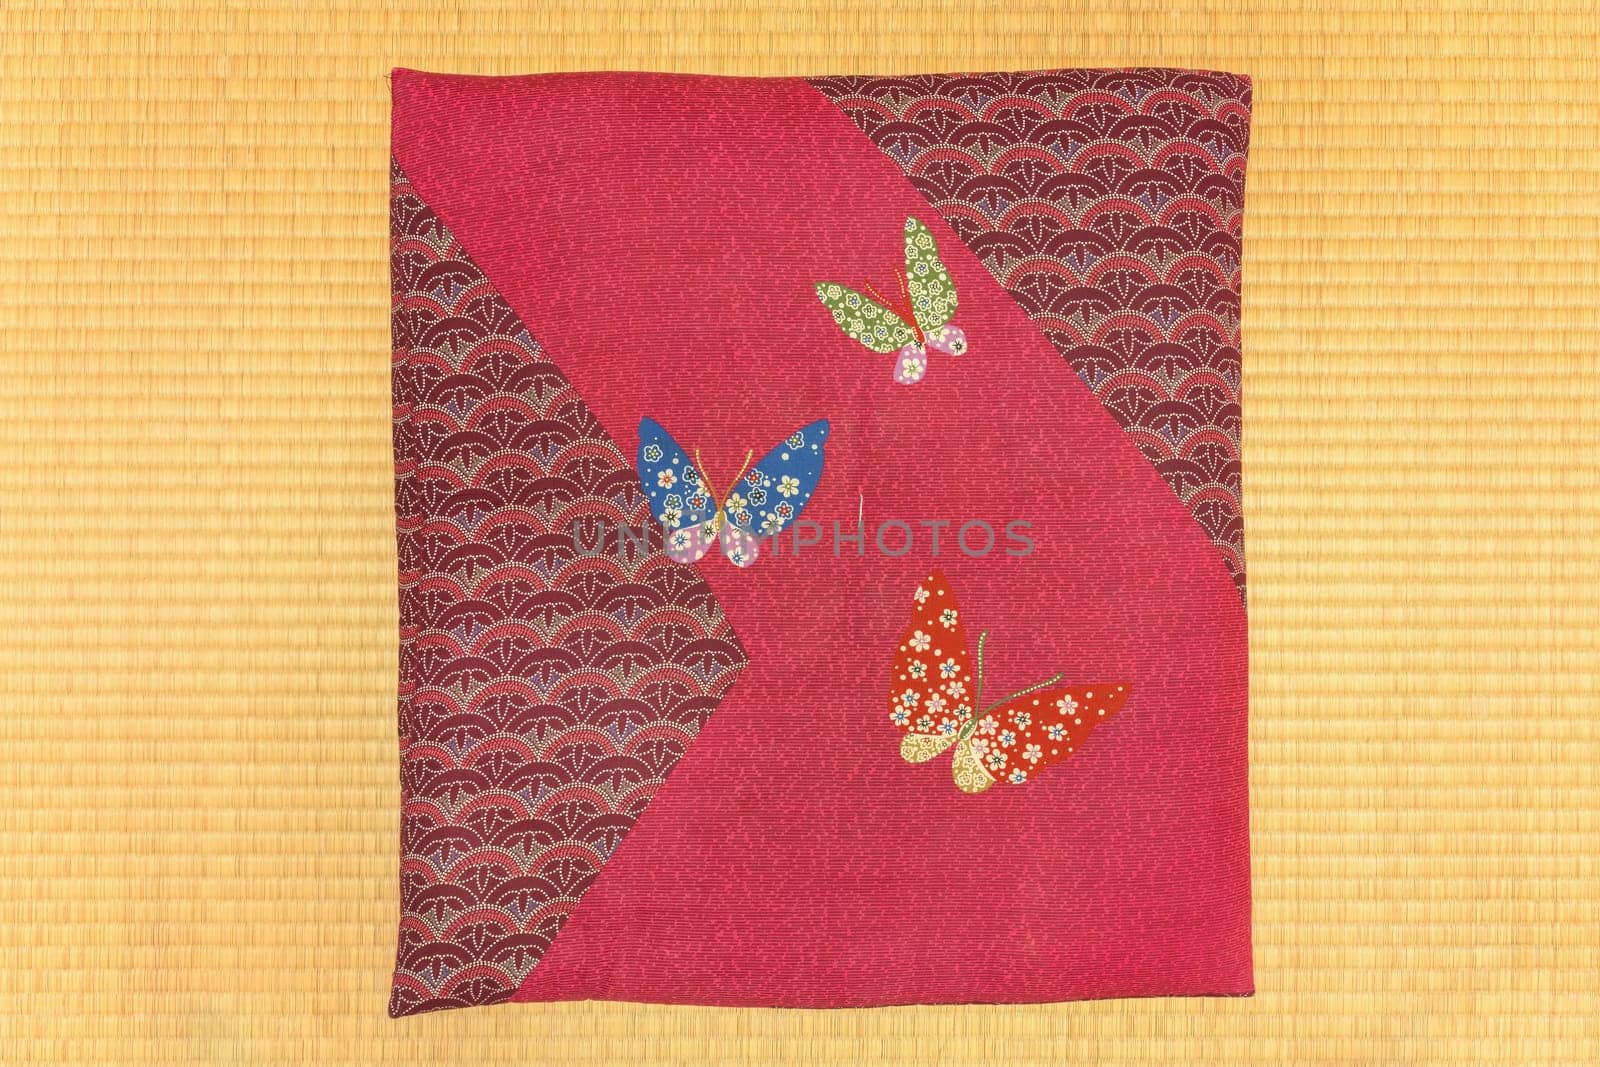 Japanese zabuton cushion with embroidered butterflies on a rice straw tatami. by kuremo